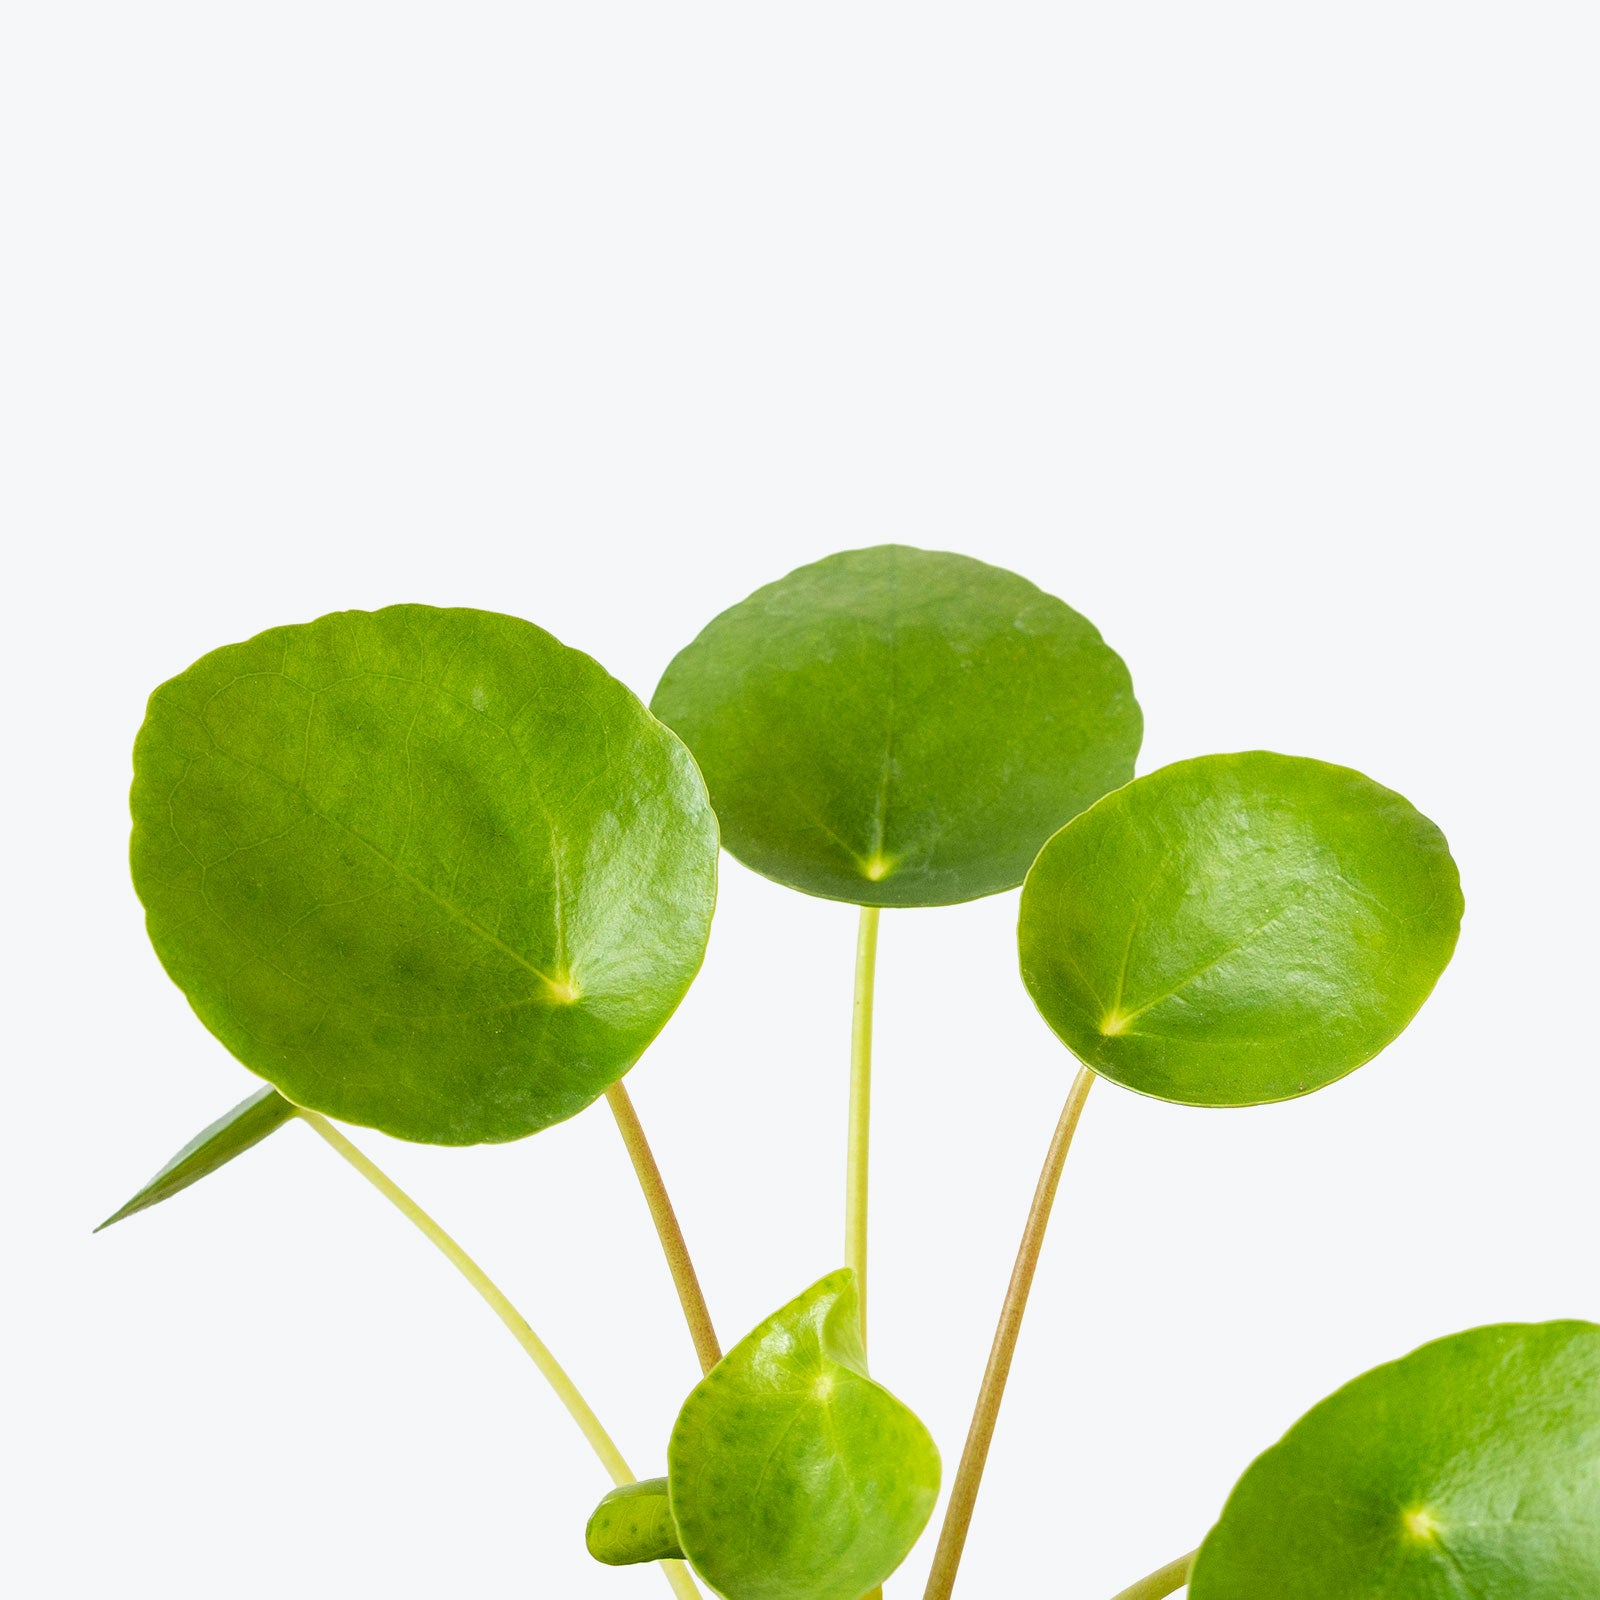 Pet Friendly Duo Pilea Peperomioides in 3D Printed Eco Friendly Planter - House Plants Delivery Toronto - JOMO Studio